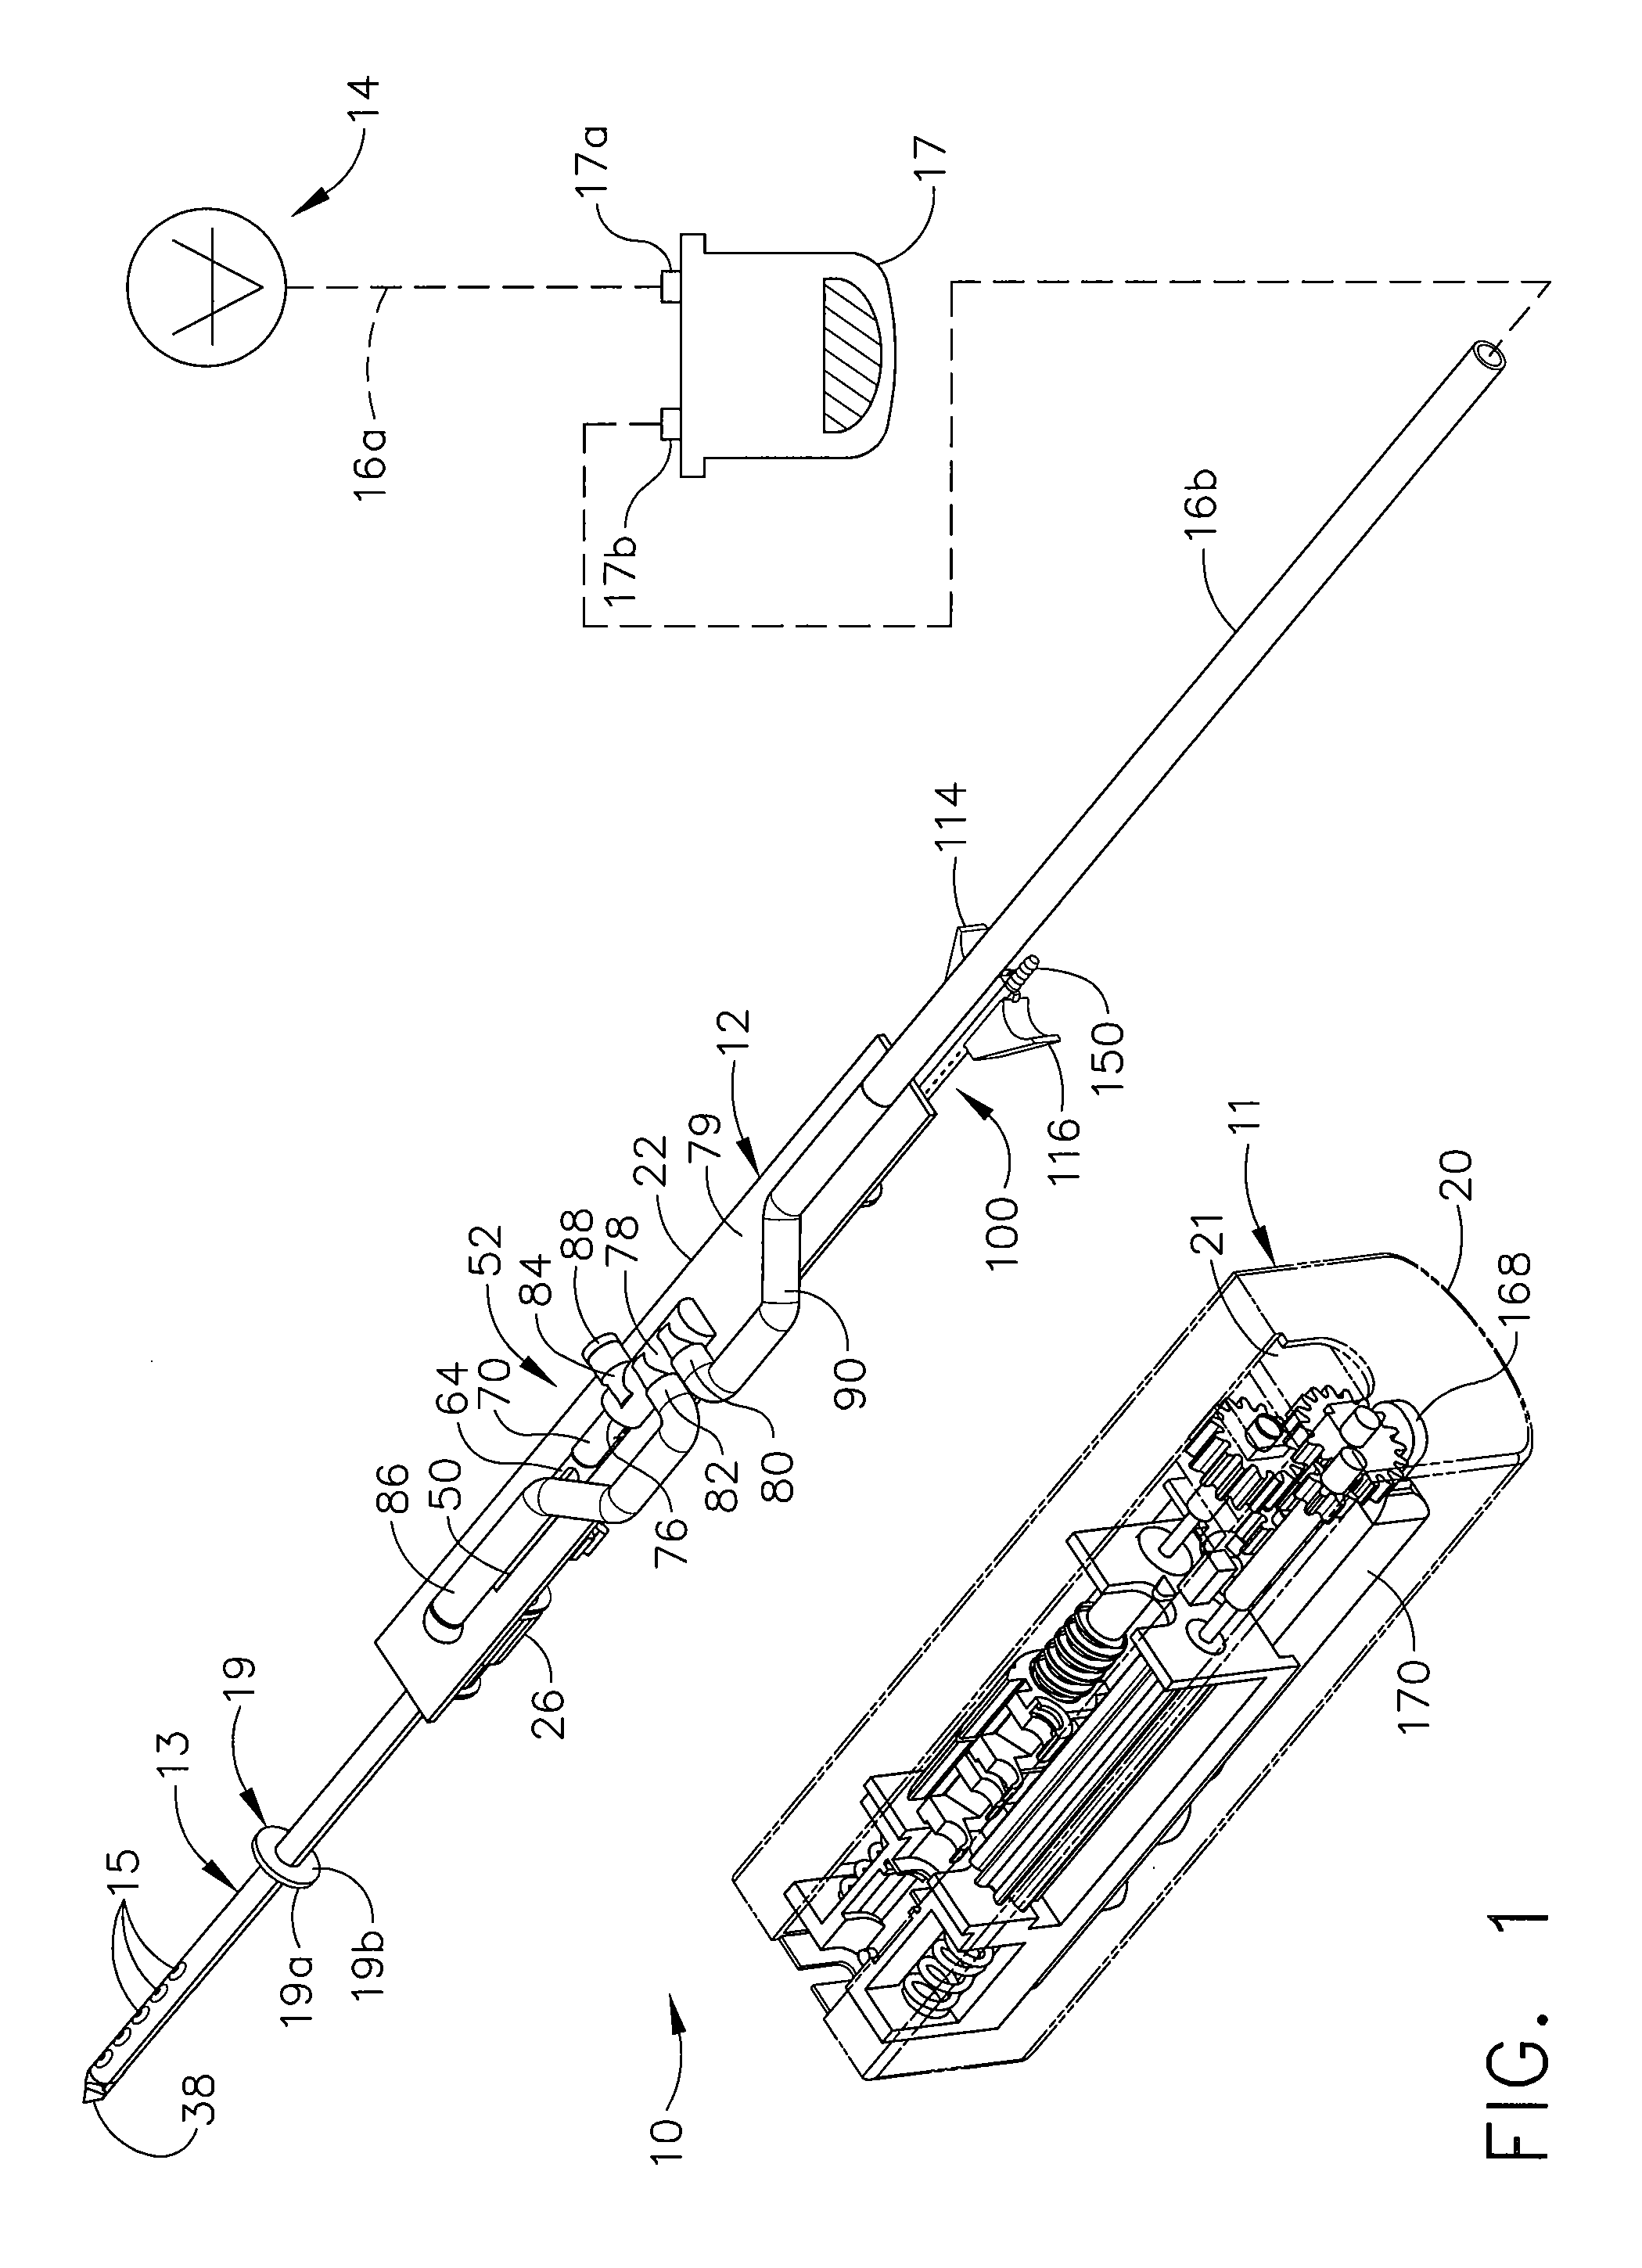 Biopsy Device with Vacuum Assisted Bleeding Control